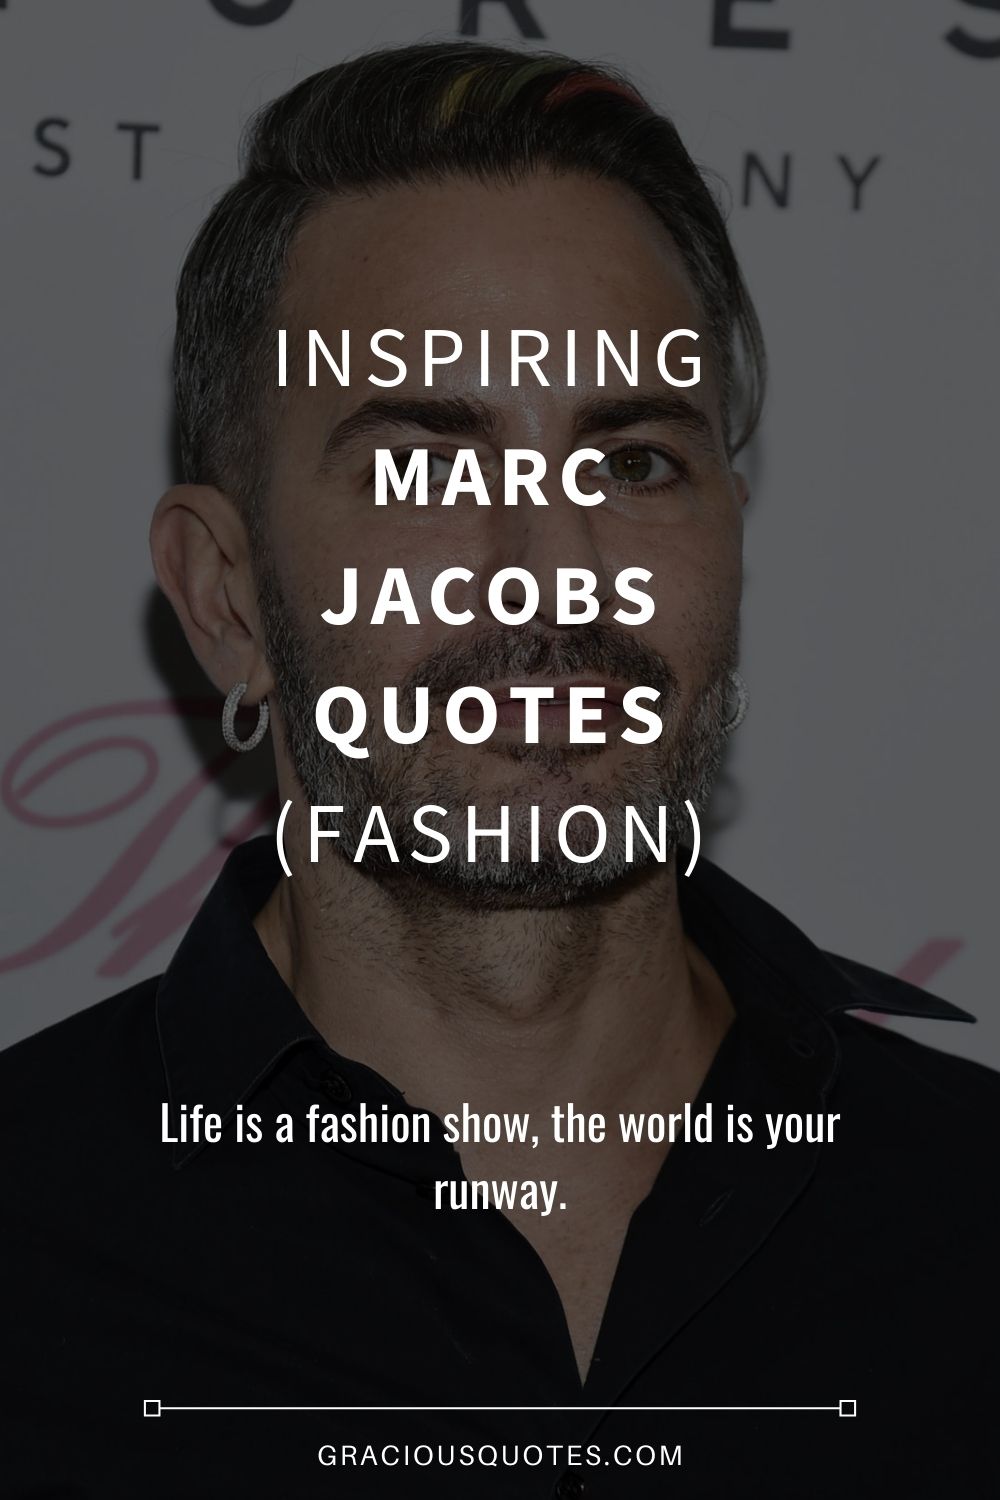 Marc Jacobs quote: I always wanted to be a fashion designer so I